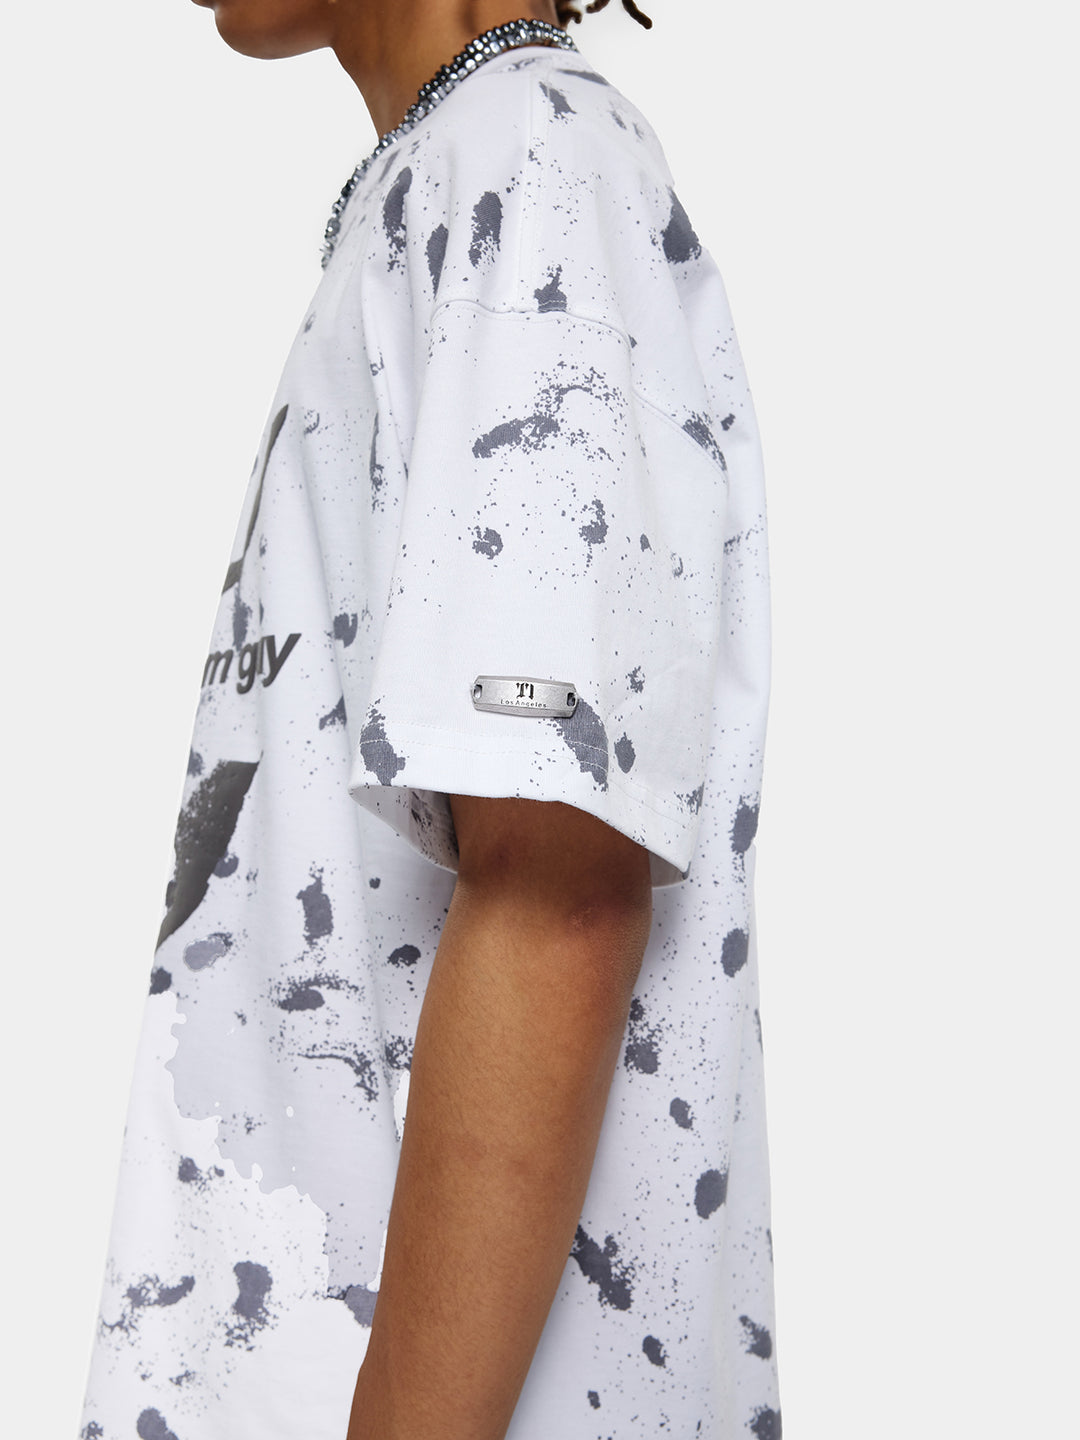 T-one Dye Printed Graphic Short Sleeve Tops-white